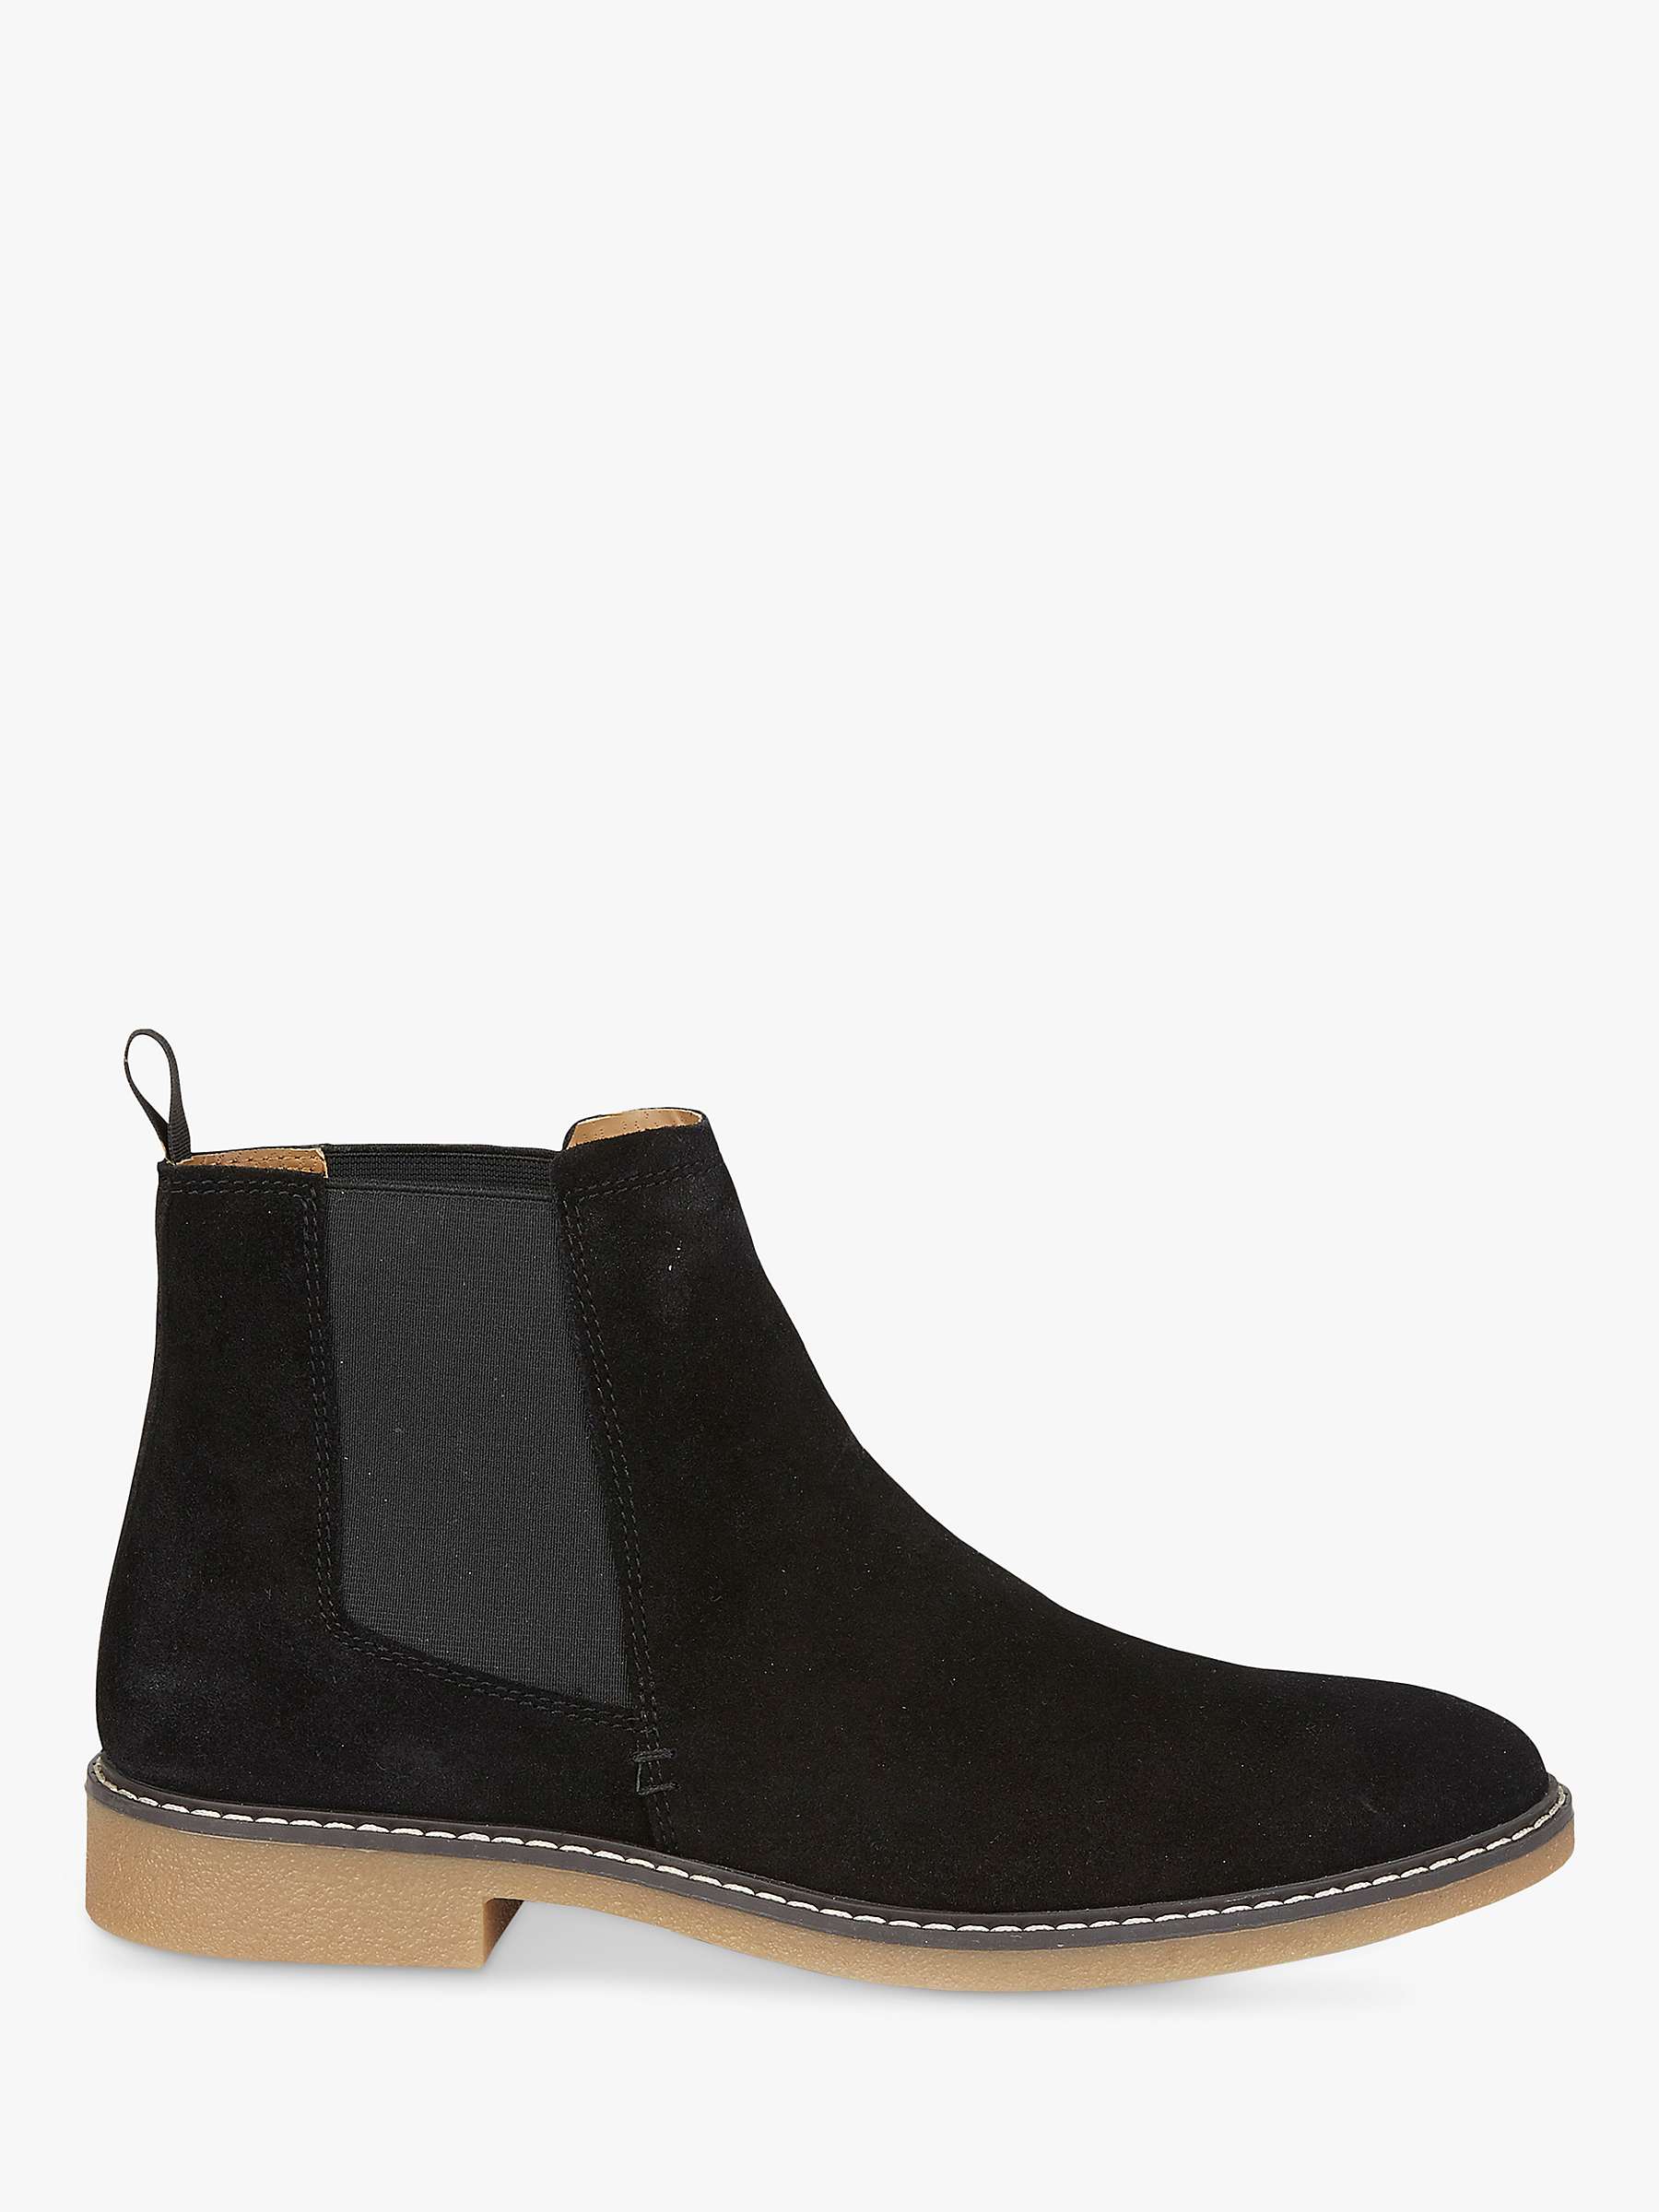 Buy Silver Street London Pimlico Suede Chelsea Boots Online at johnlewis.com